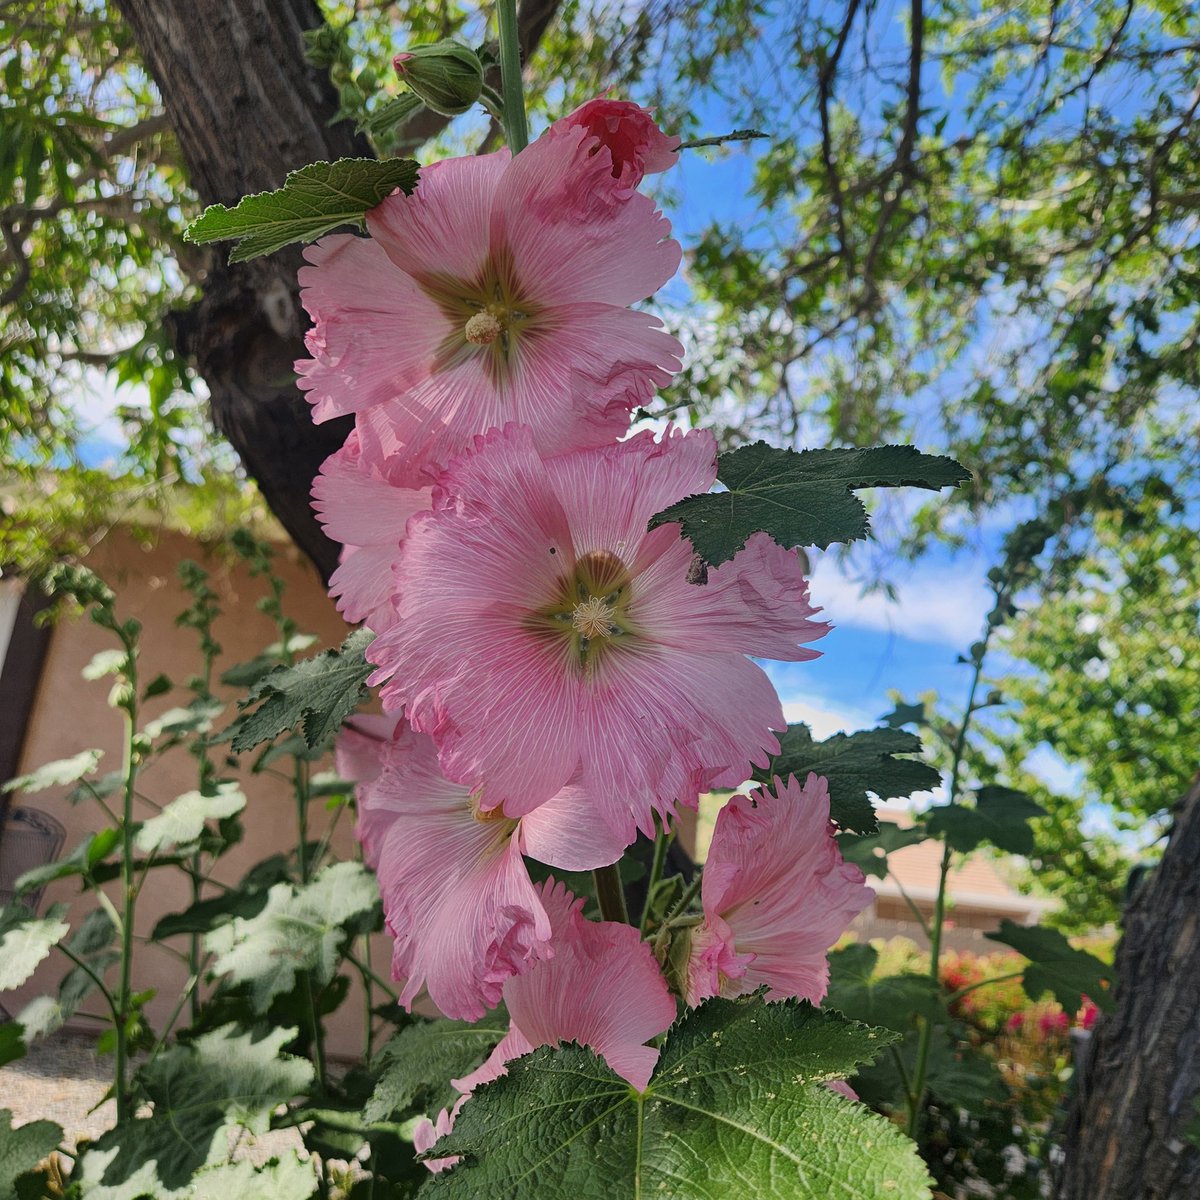 Light pink colored Hollyhocks. So May is when they reached full bloom 🌸